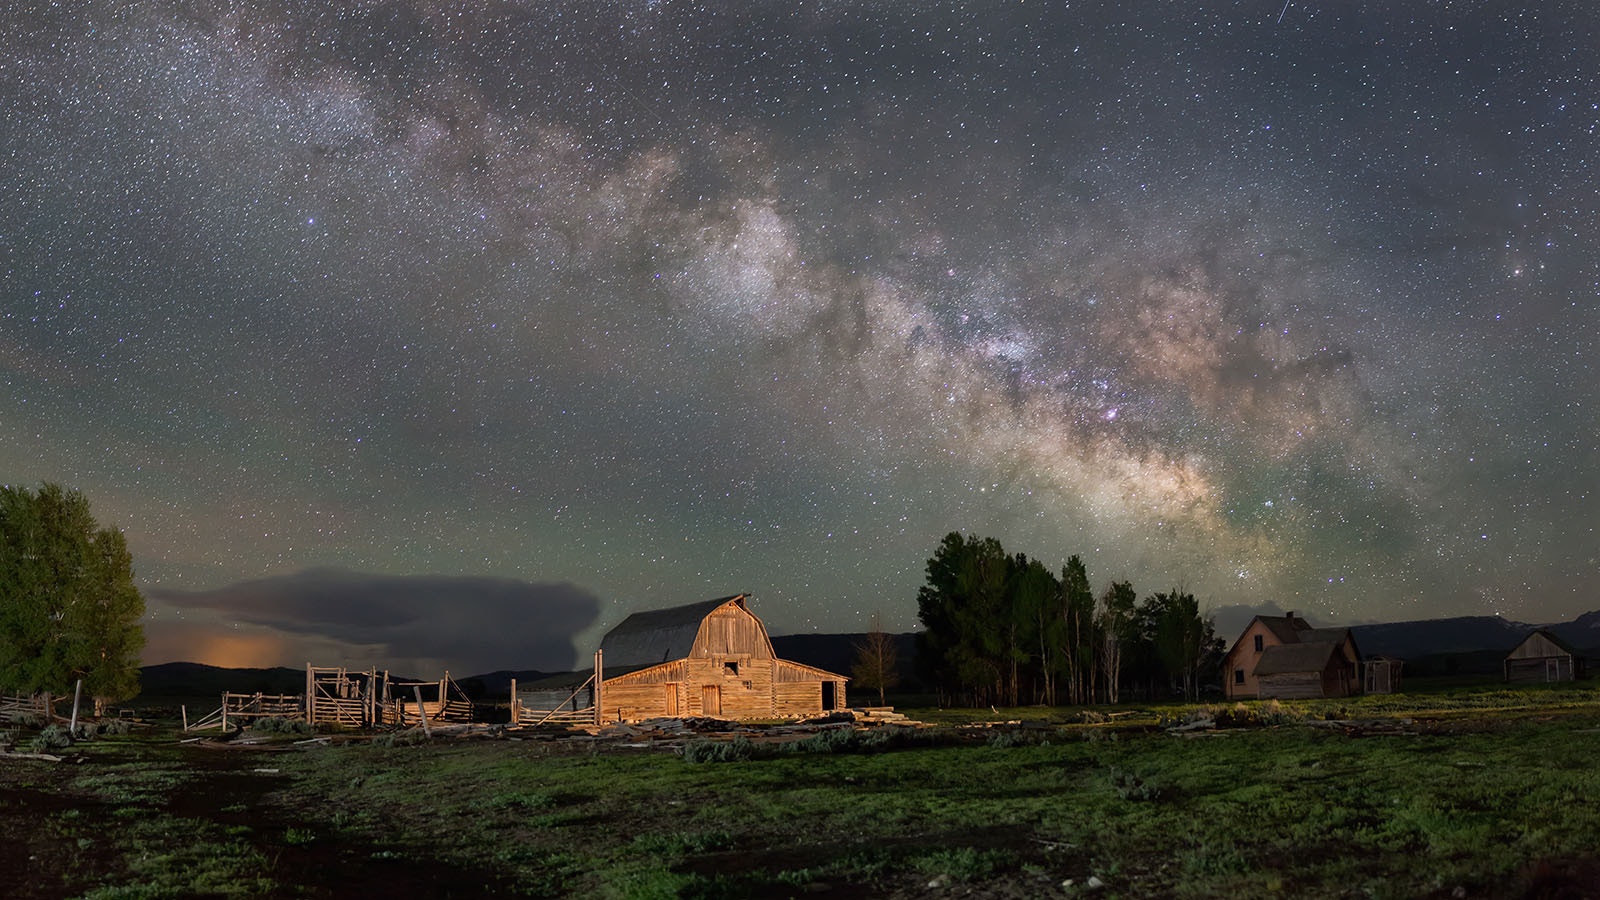 The Milky Way Galaxy as seen in the pristine night skies over Wyoming.